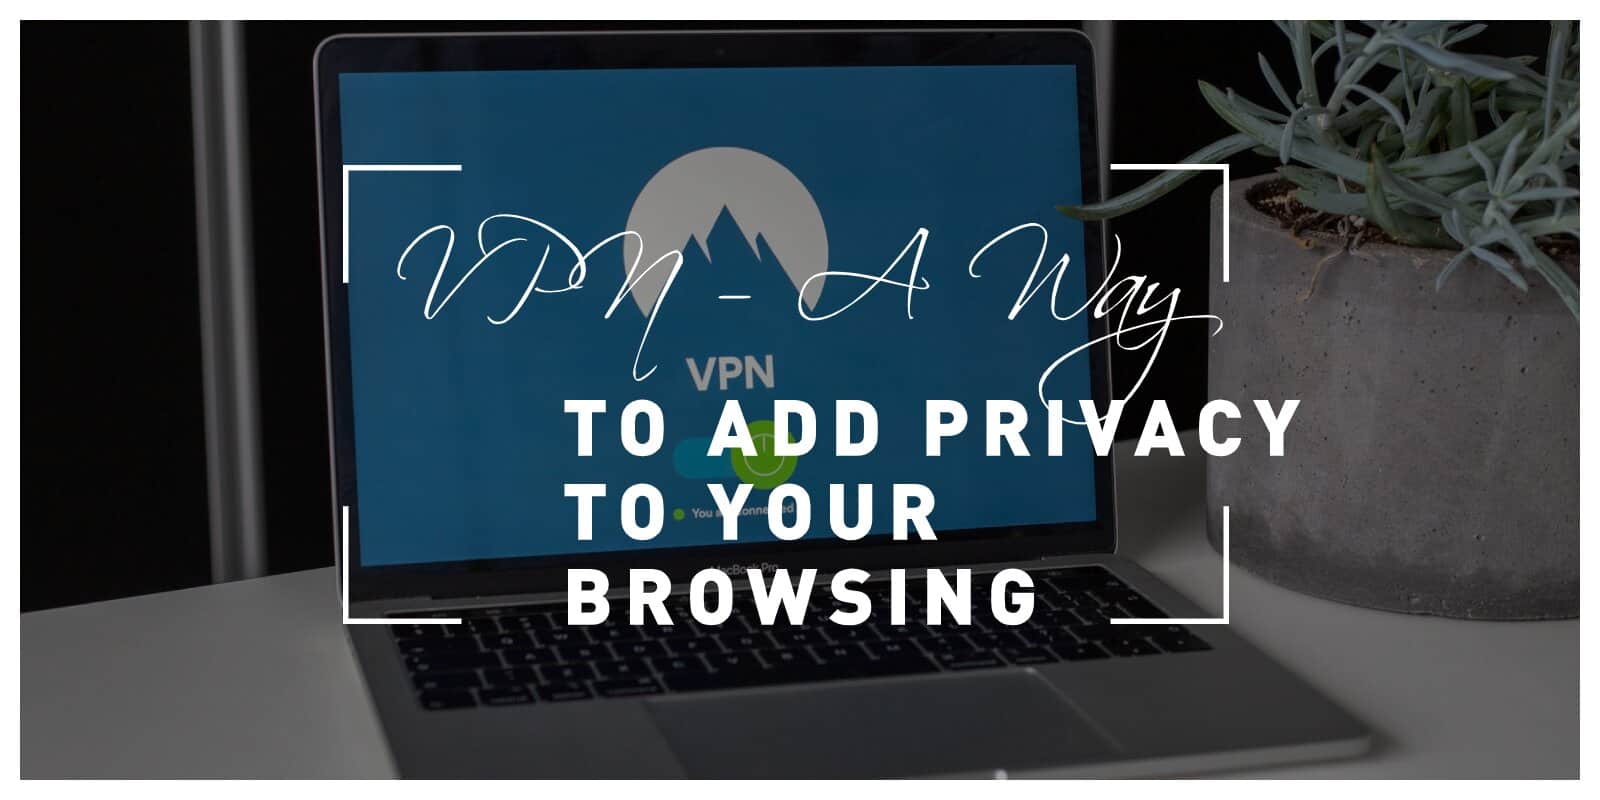 VPN – A Better Way To Add Privacy To Your Browsing